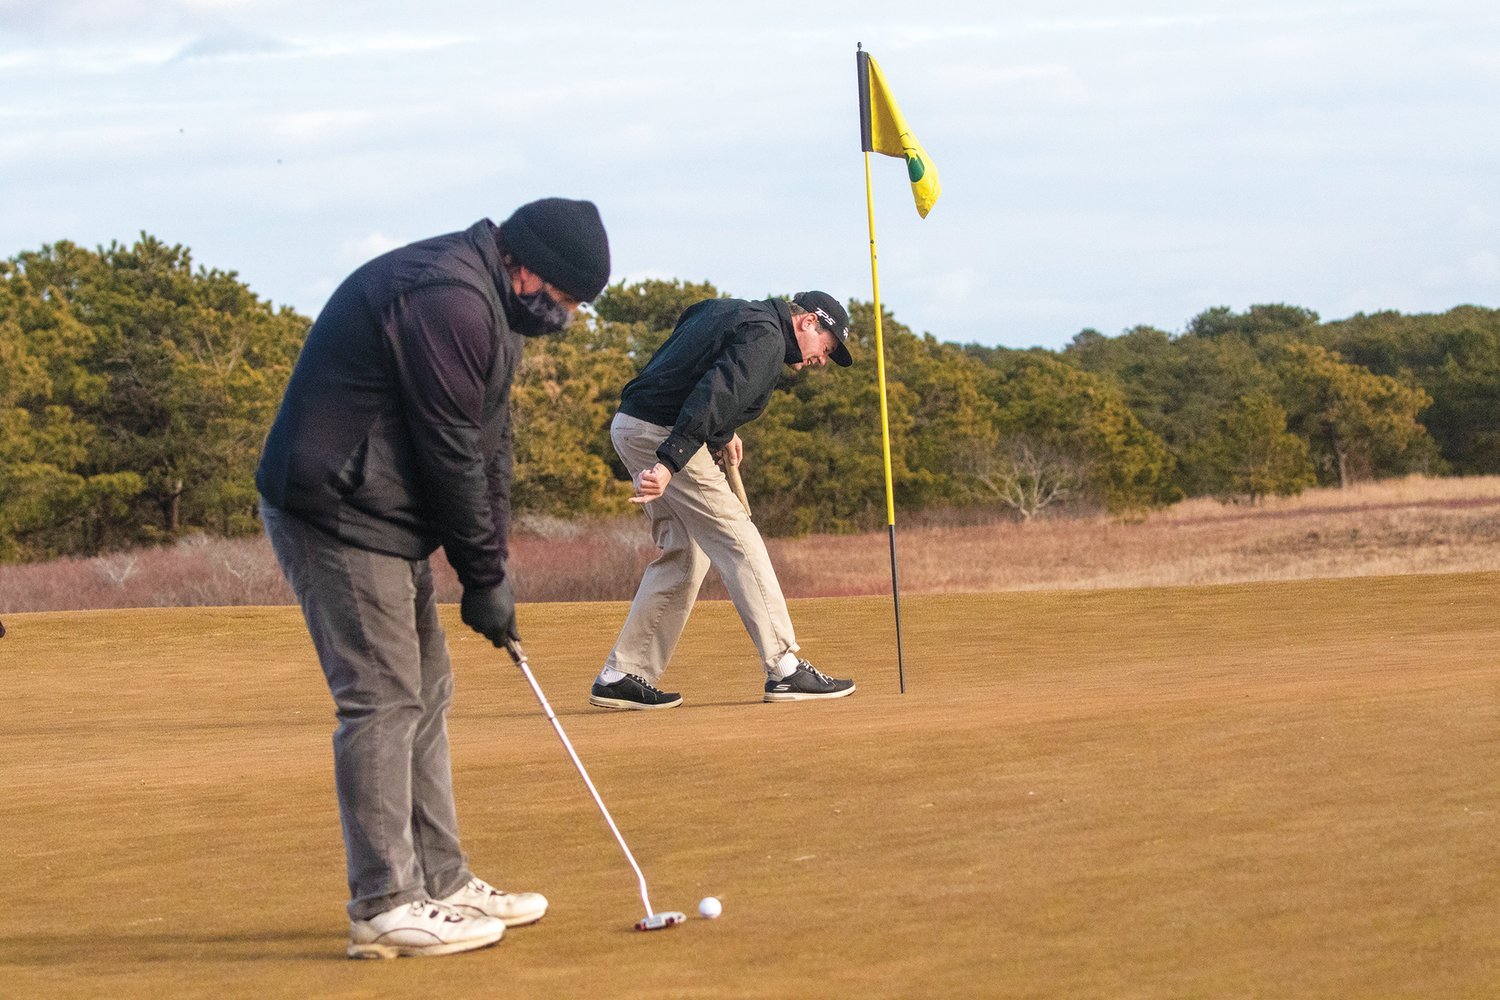 David Macaulay lines up a putt while Jim Wiemann retrieves his ball from the hole during a round of winter golf at the Miacomet Golf Course last week. Off-season play at Miacomet is up significantly over past years.